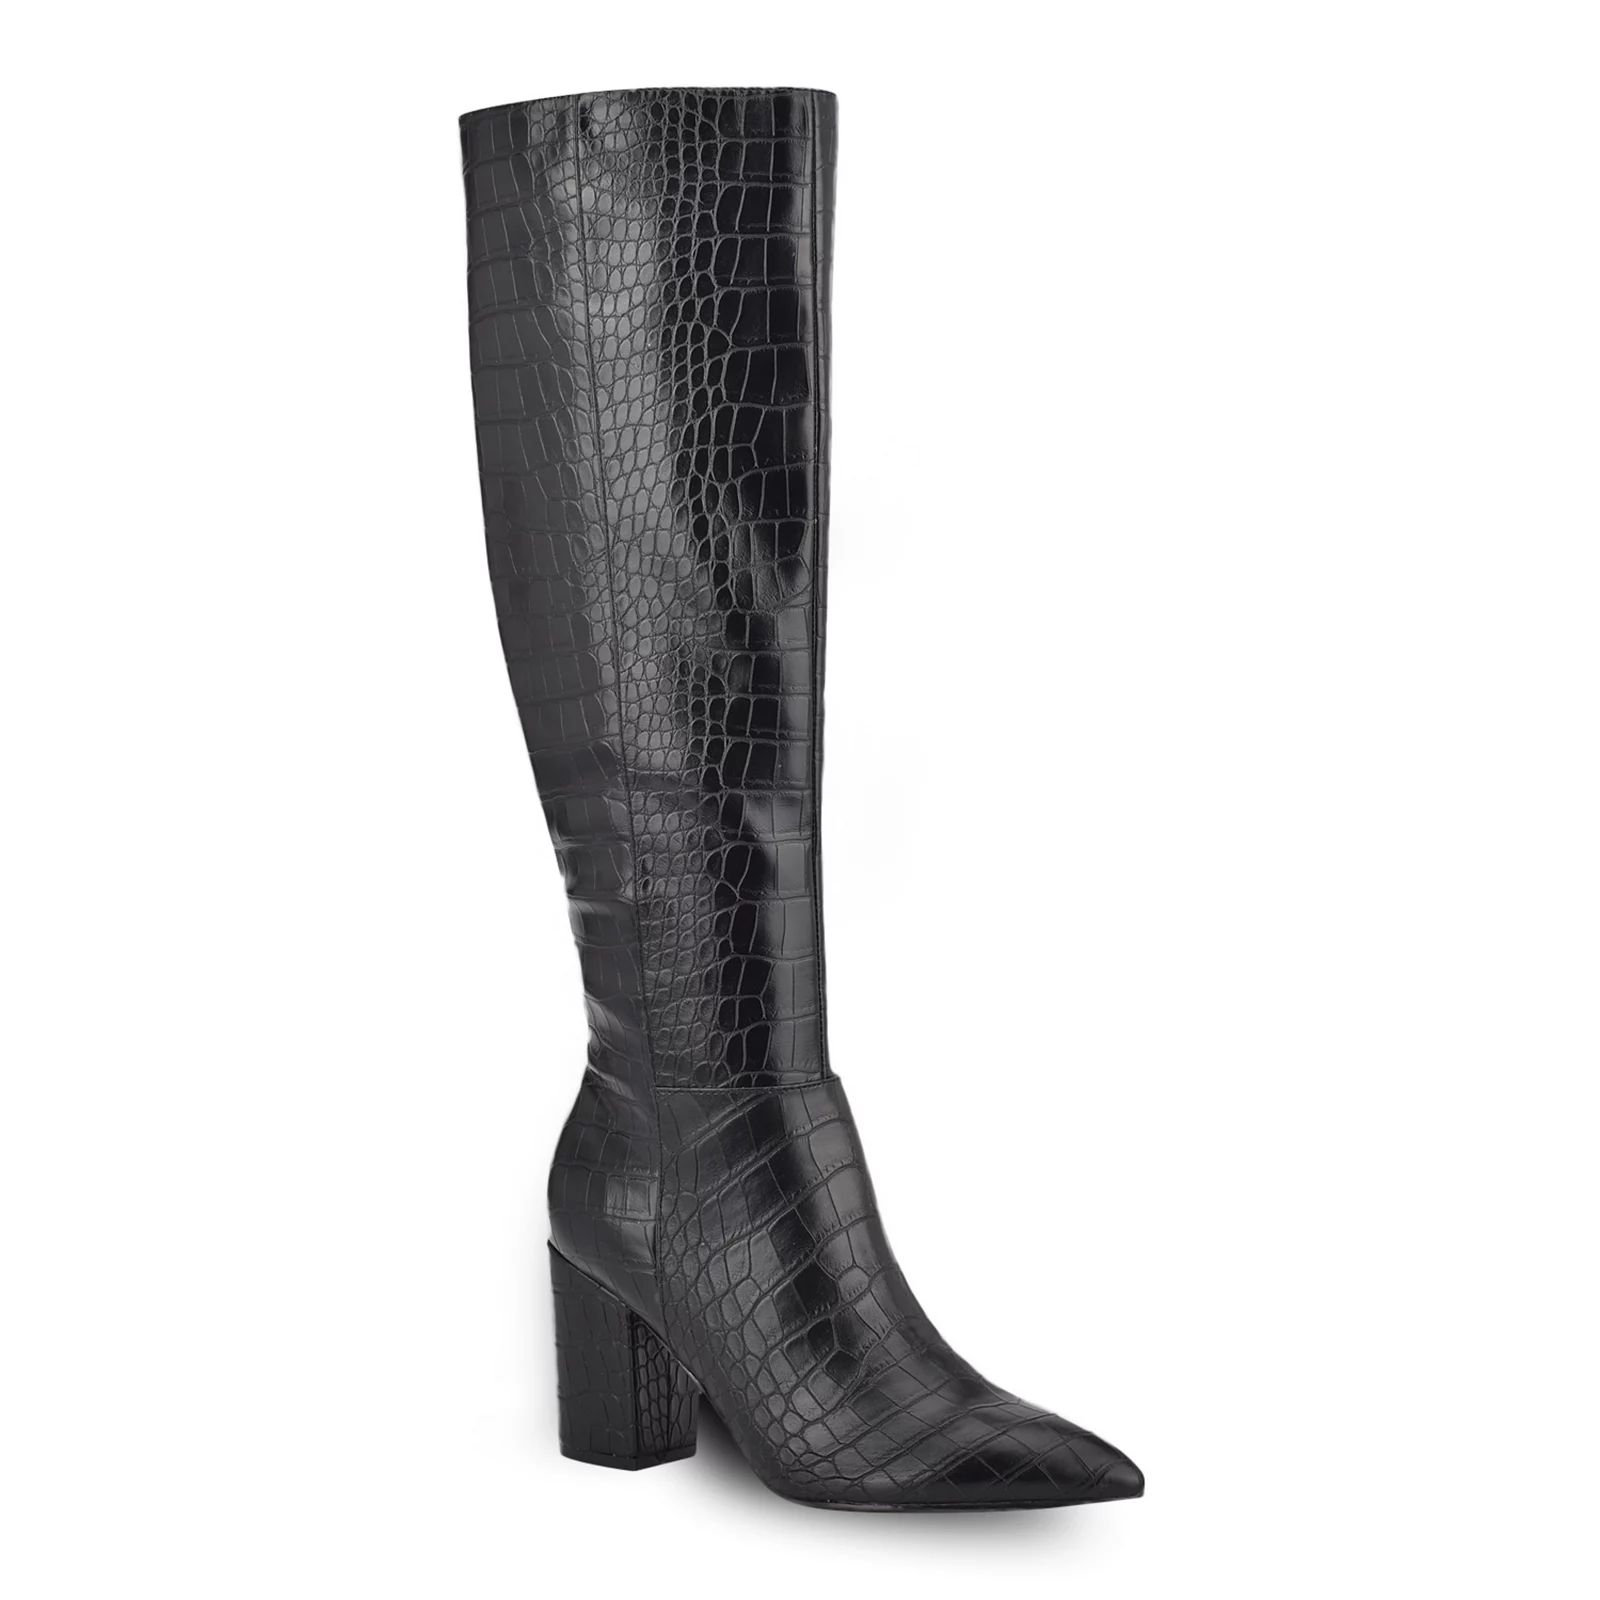 Nine West Adaly Women's Tall Boots, Size: 7, Black Croco | Kohl's